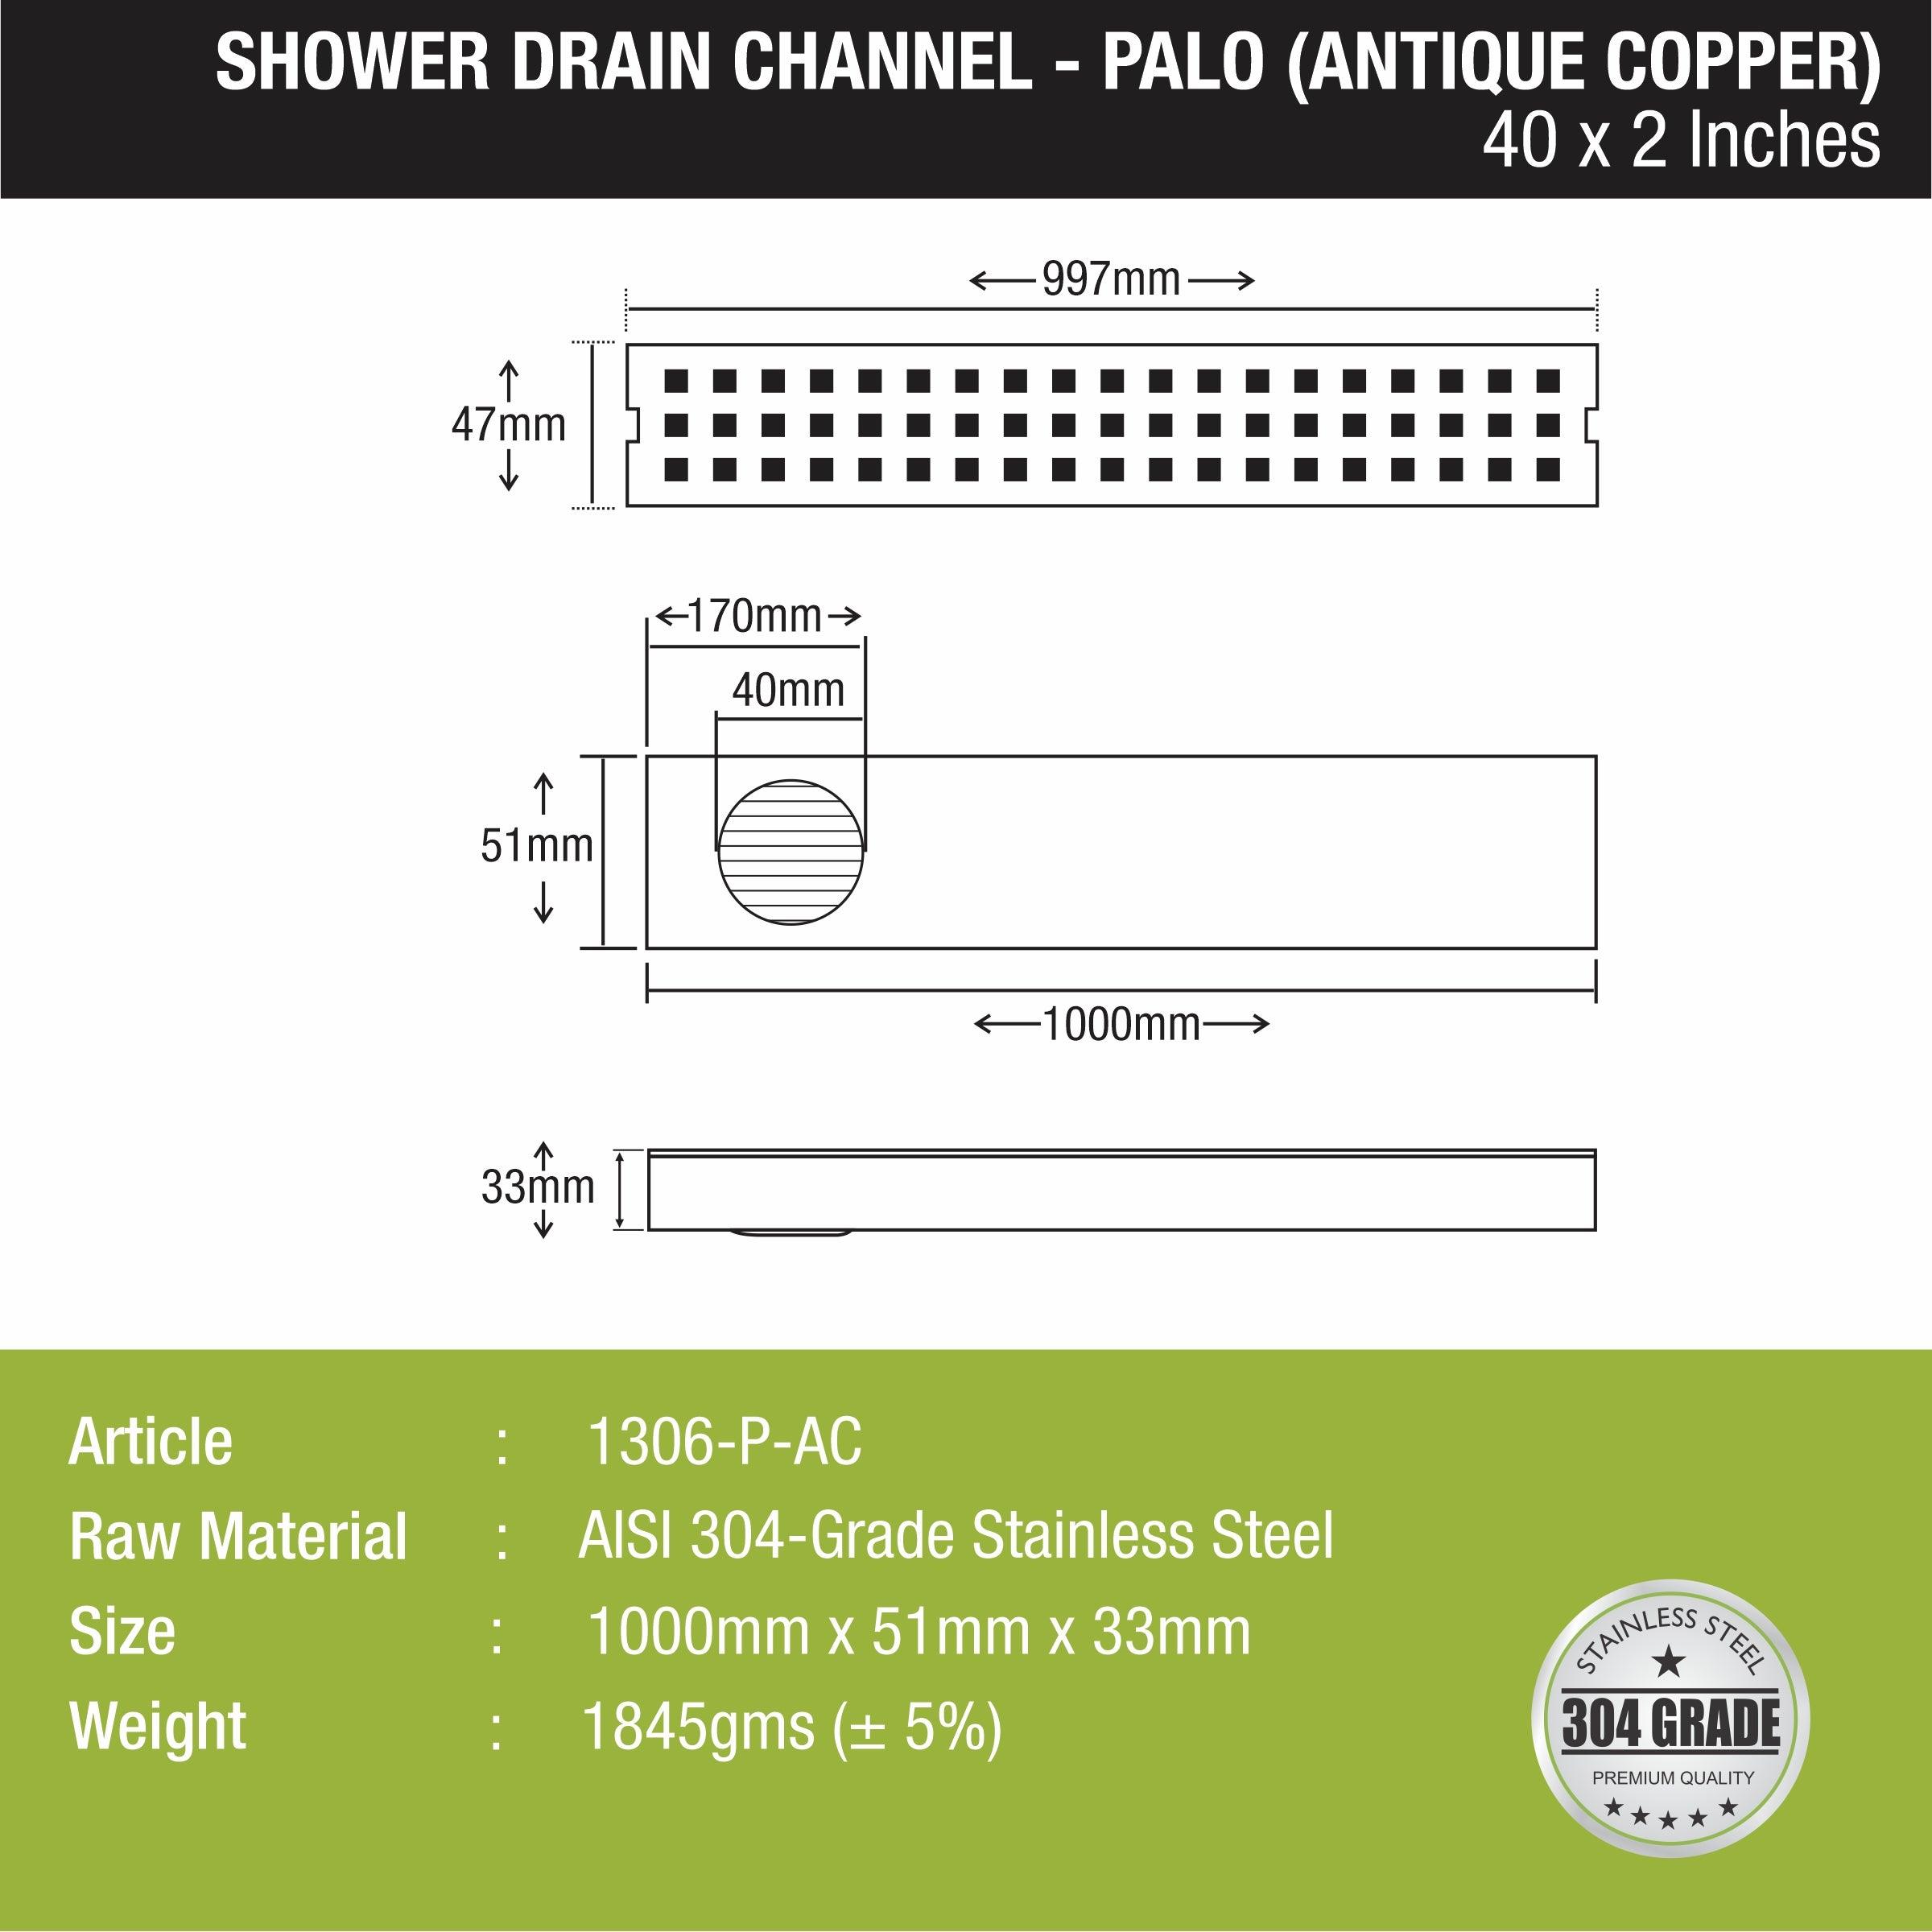 Palo Shower Drain Channel - Antique Copper (40 x 2 Inches) sizes and dimensions